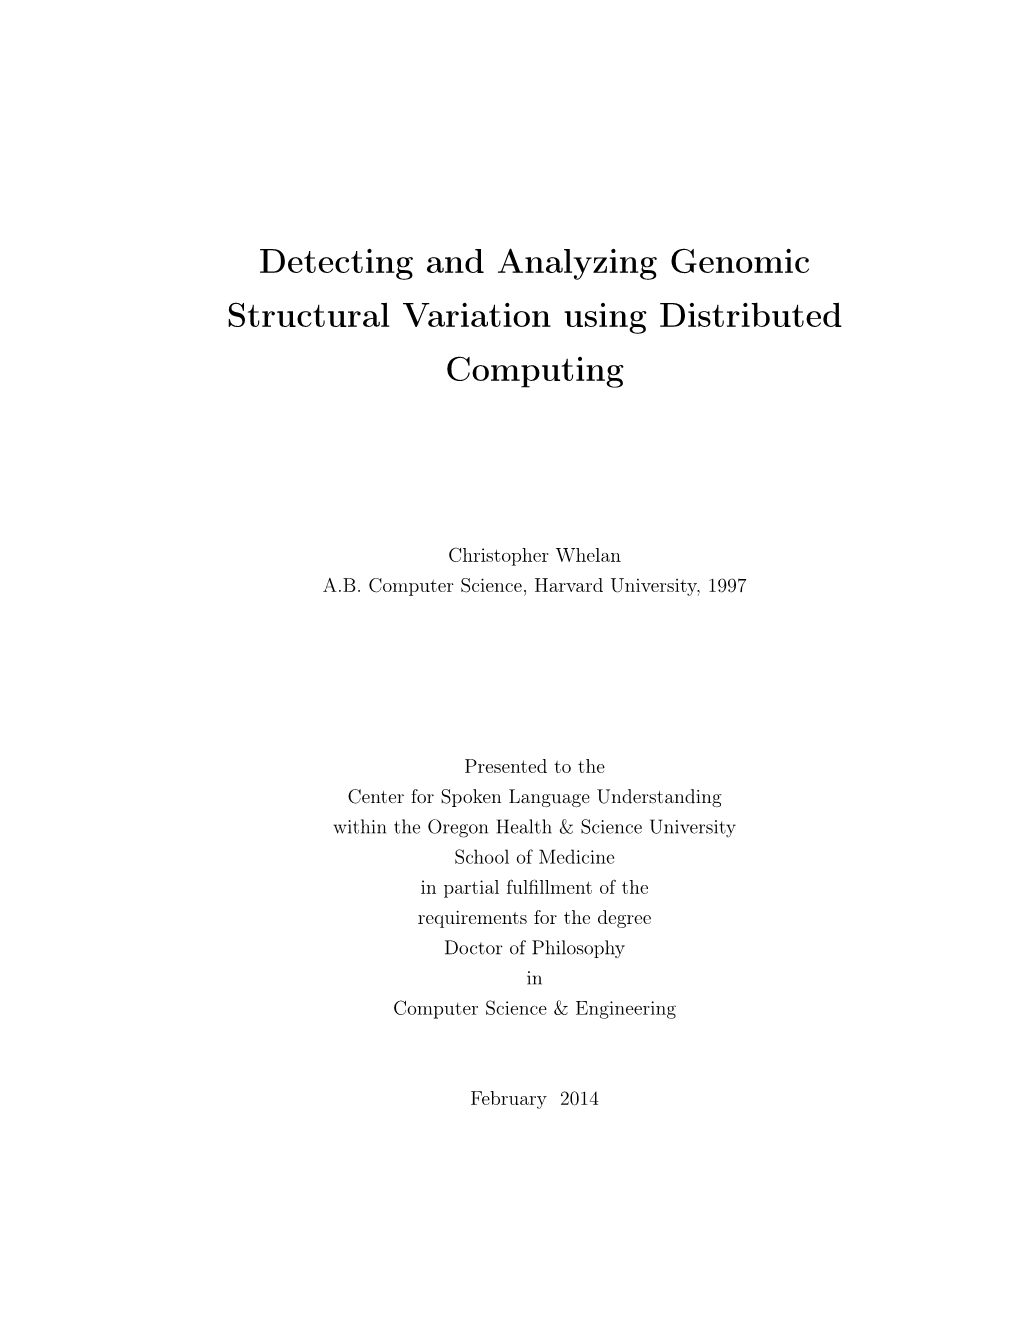 Detecting and Analyzing Genomic Structural Variation Using Distributed Computing